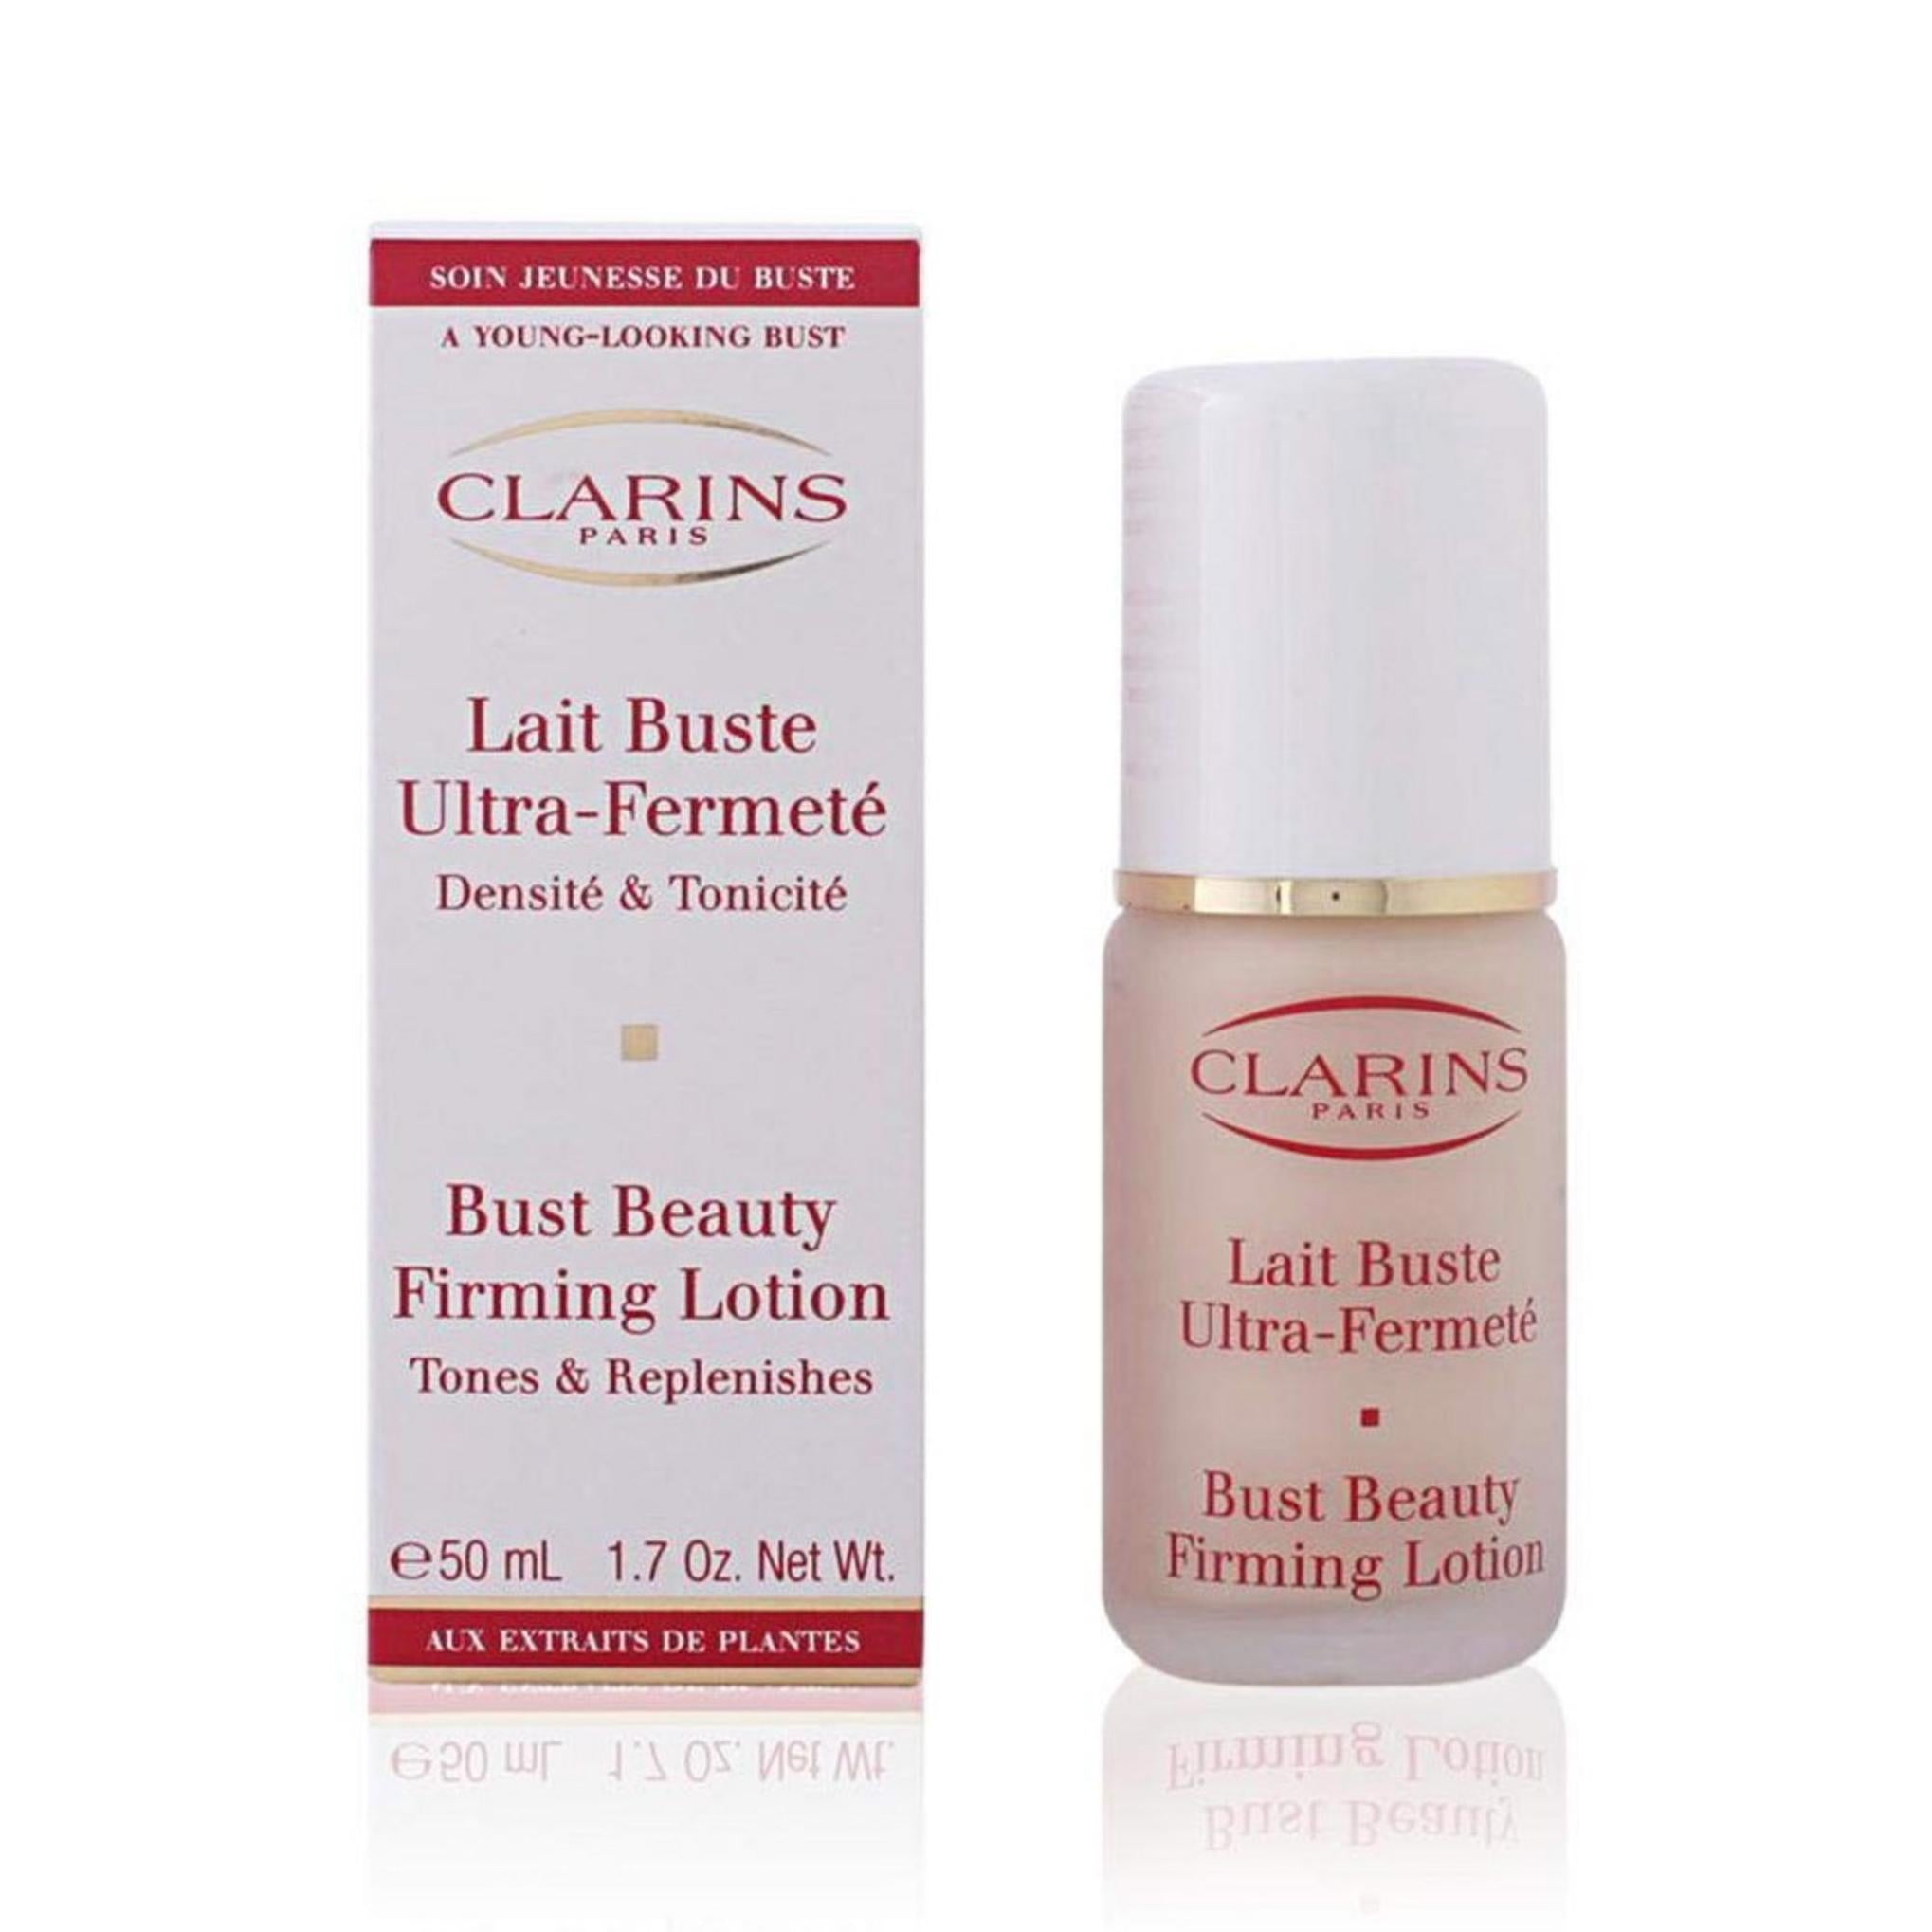 Clarins Burst Beauty Firming Lotion